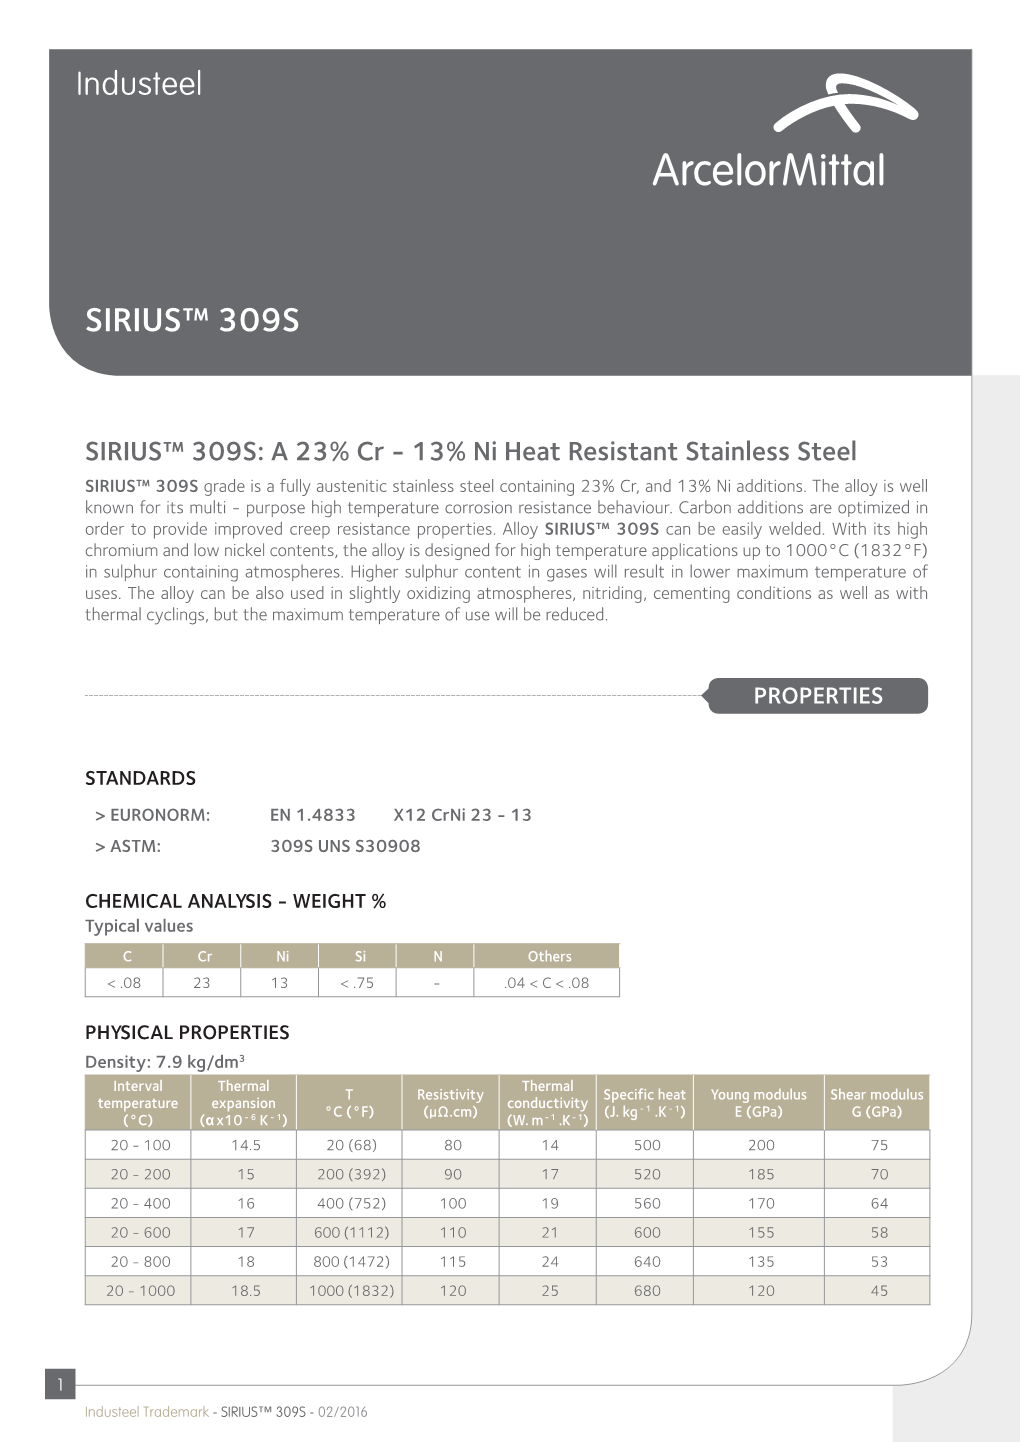 SIRIUS™ 309S: a 23% Cr - 13% Ni Heat Resistant Stainless Steel SIRIUS™ 309S Grade Is a Fully Austenitic Stainless Steel Containing 23% Cr, and 13% Ni Additions